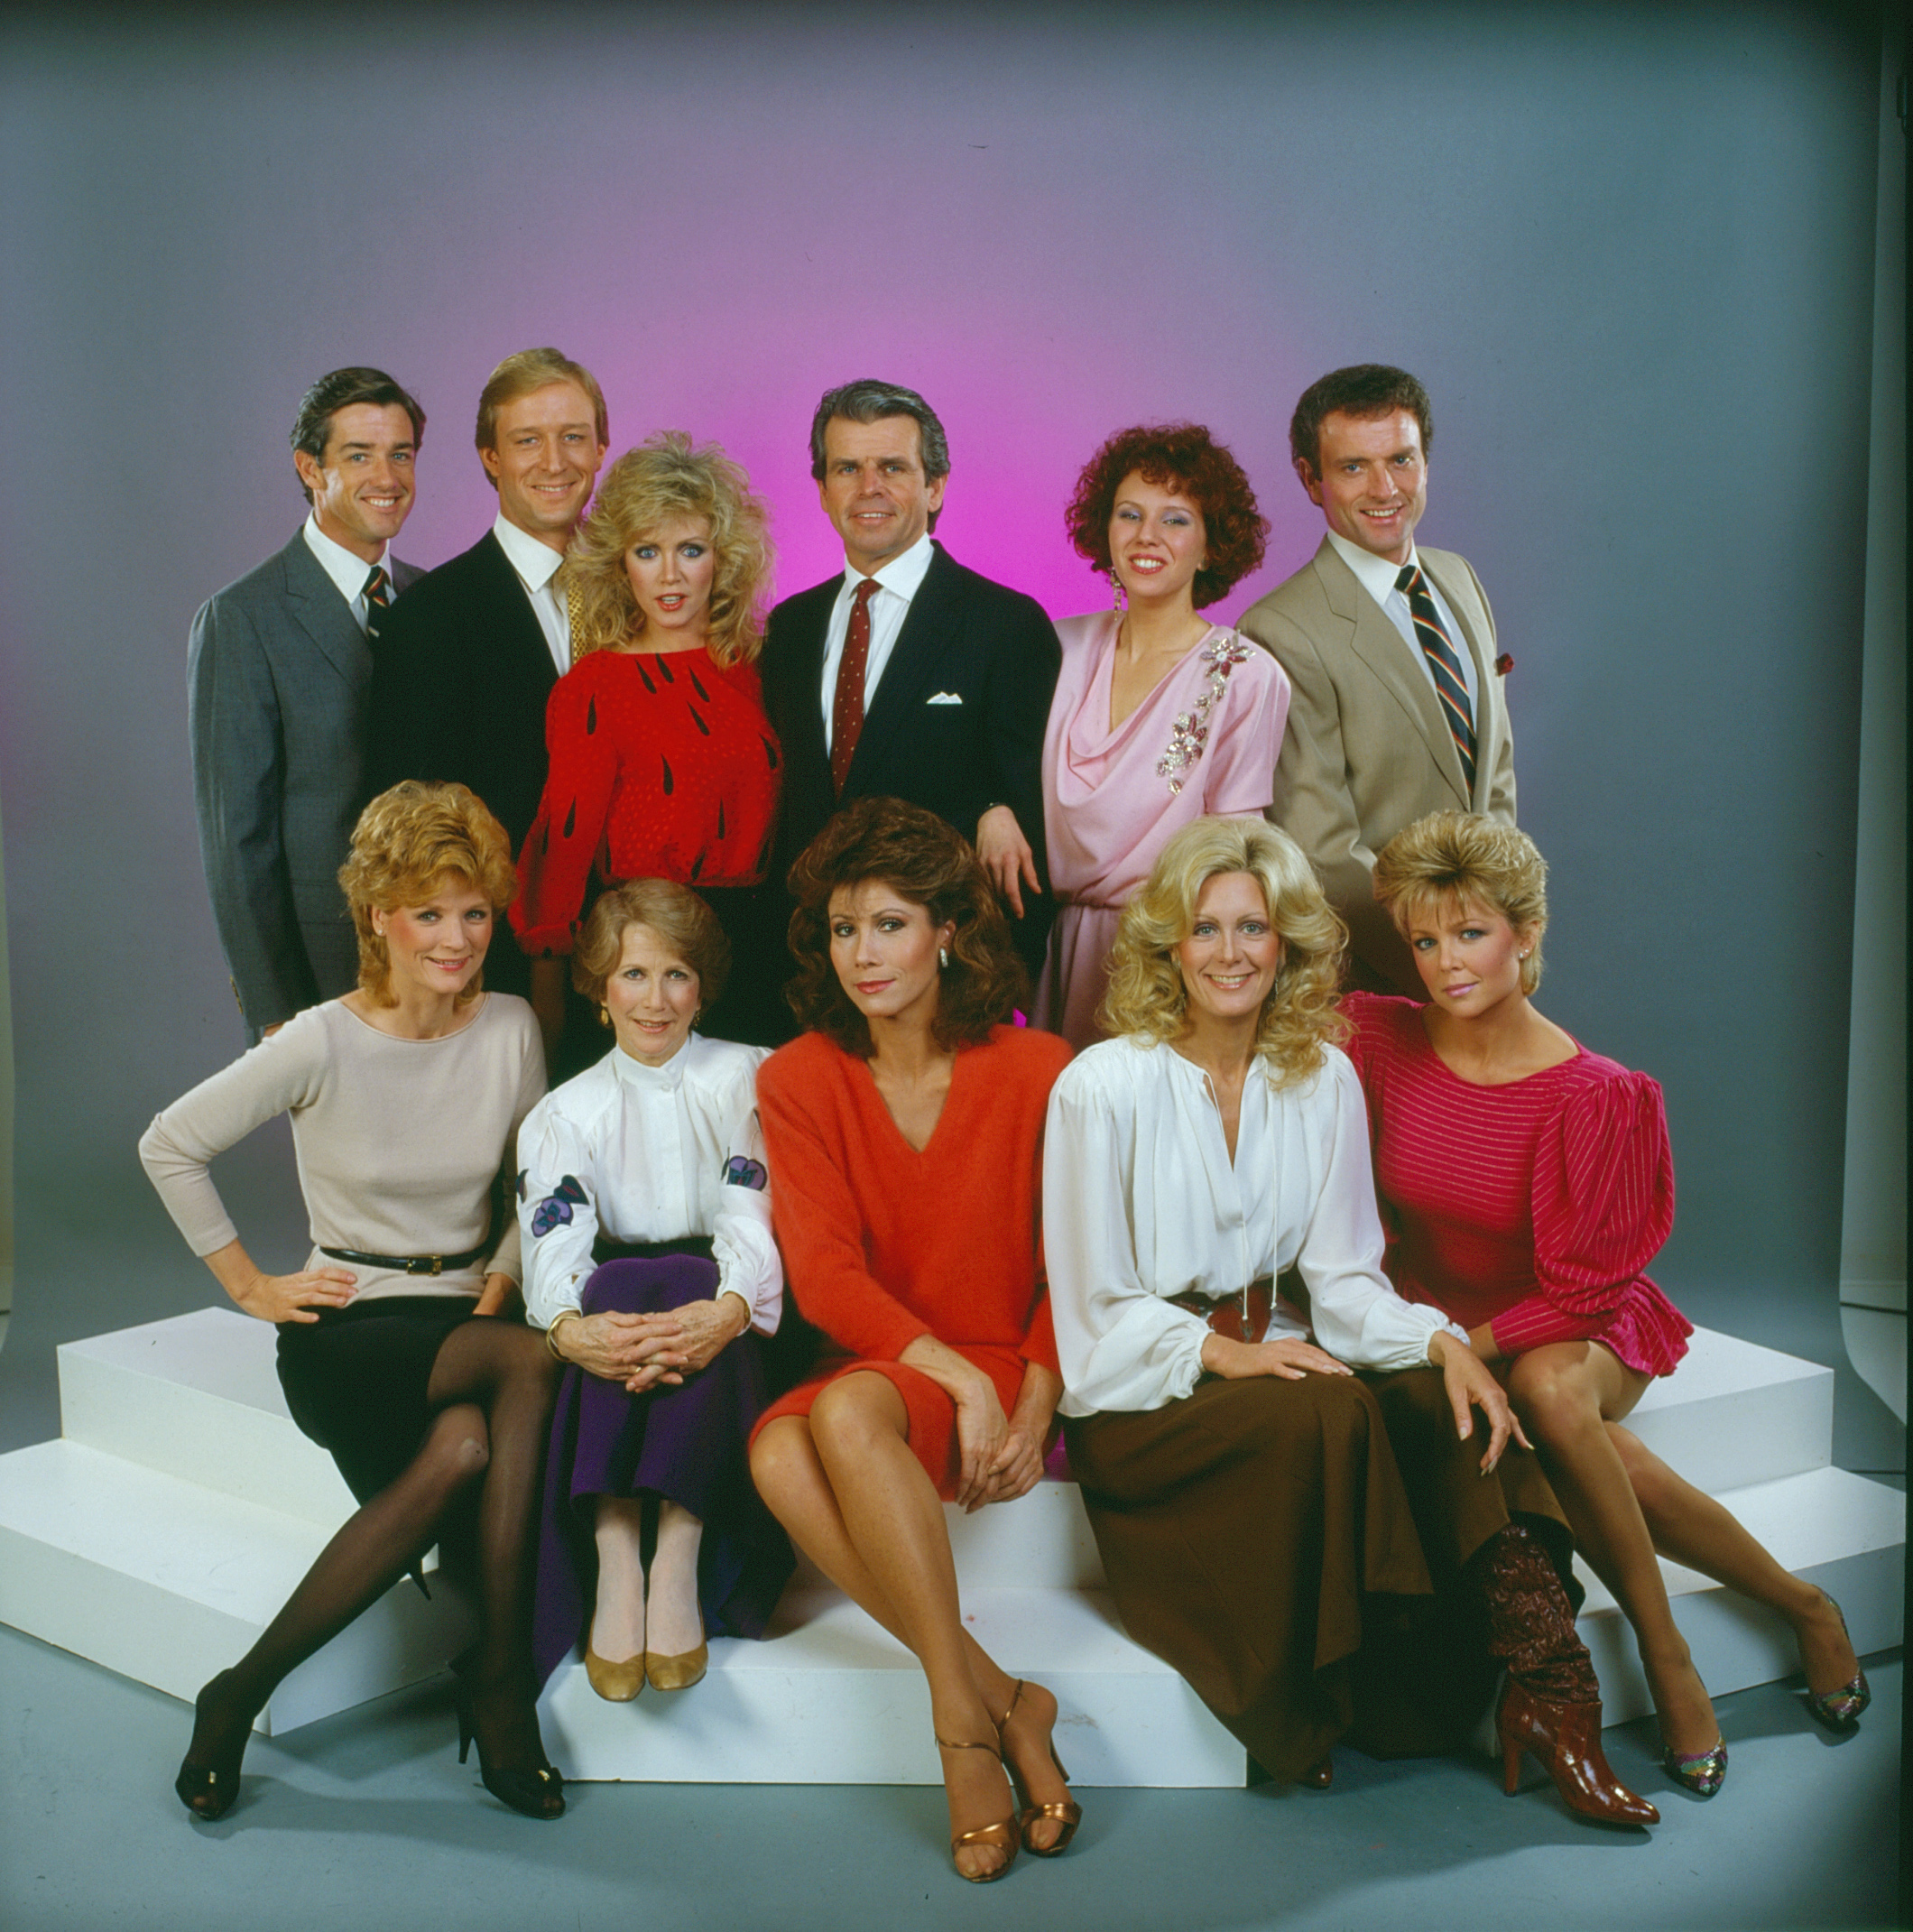 Back row from left, Douglas Sheehan, Ted Shackleford, Donna Mills, William Devane, Claudia Lonow, and Kevin Dobson: Front row from left, Constance McCashin, Julie Harris, Michele Lee, Joan Van Ark, and Lisa Hartman. The "Knots Landing cast" in 1984. | Source: Getty Images